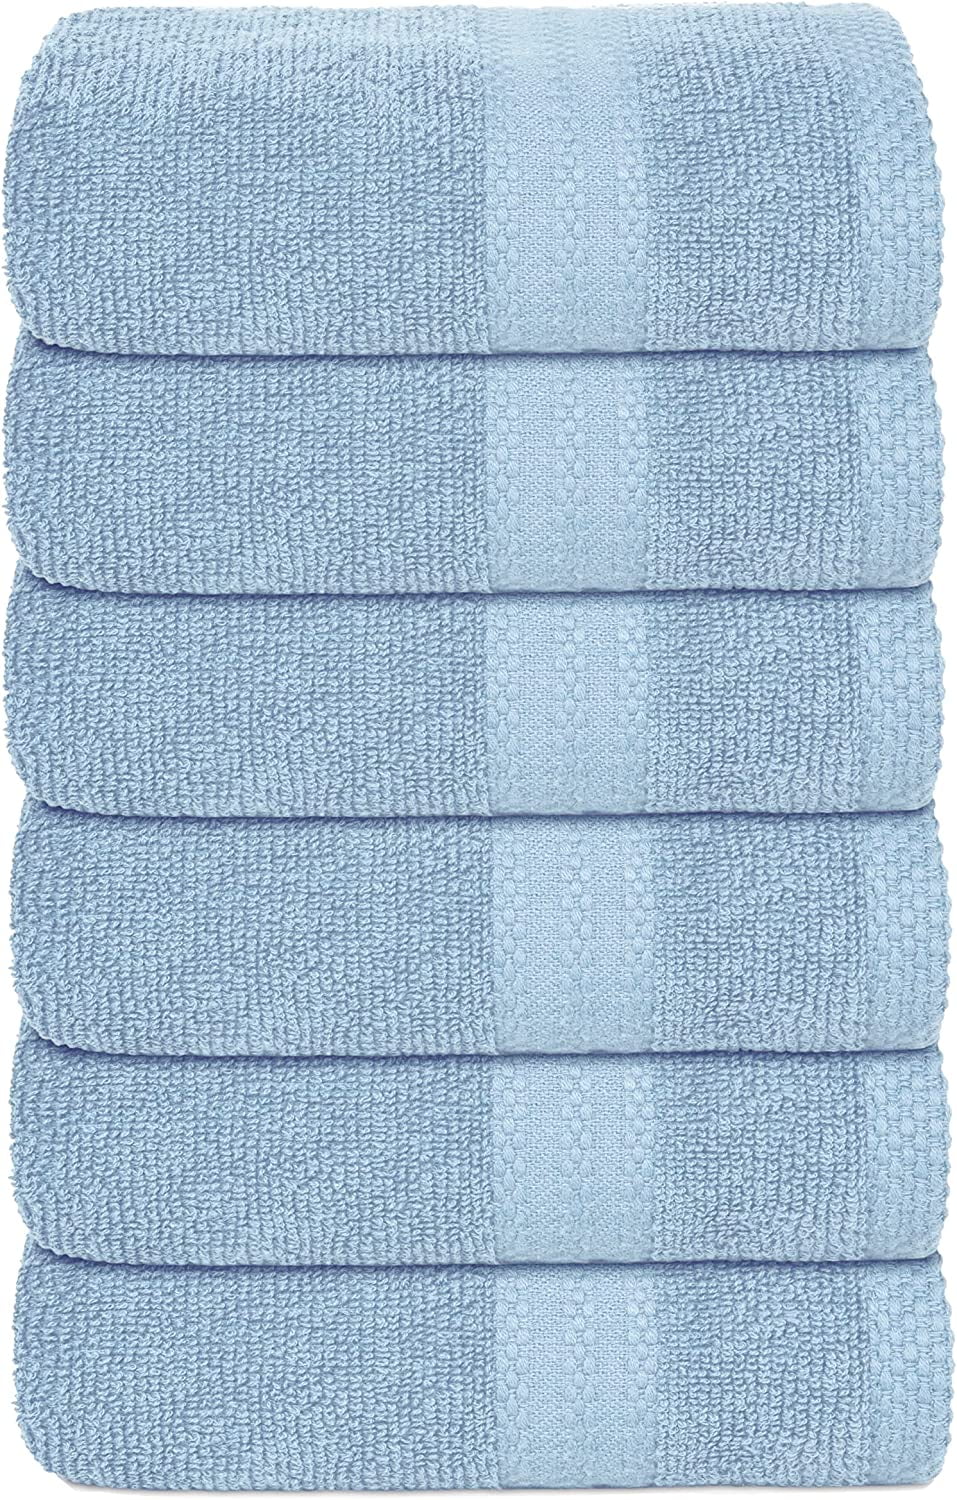 Utopia Towels 6 Pack Premium Hand Towels Set (16 x 28 inches) 100% Ring Spun Cotton Ultra Soft and Highly Absorbent 600GSM Towels for Bathroom Gym Sho